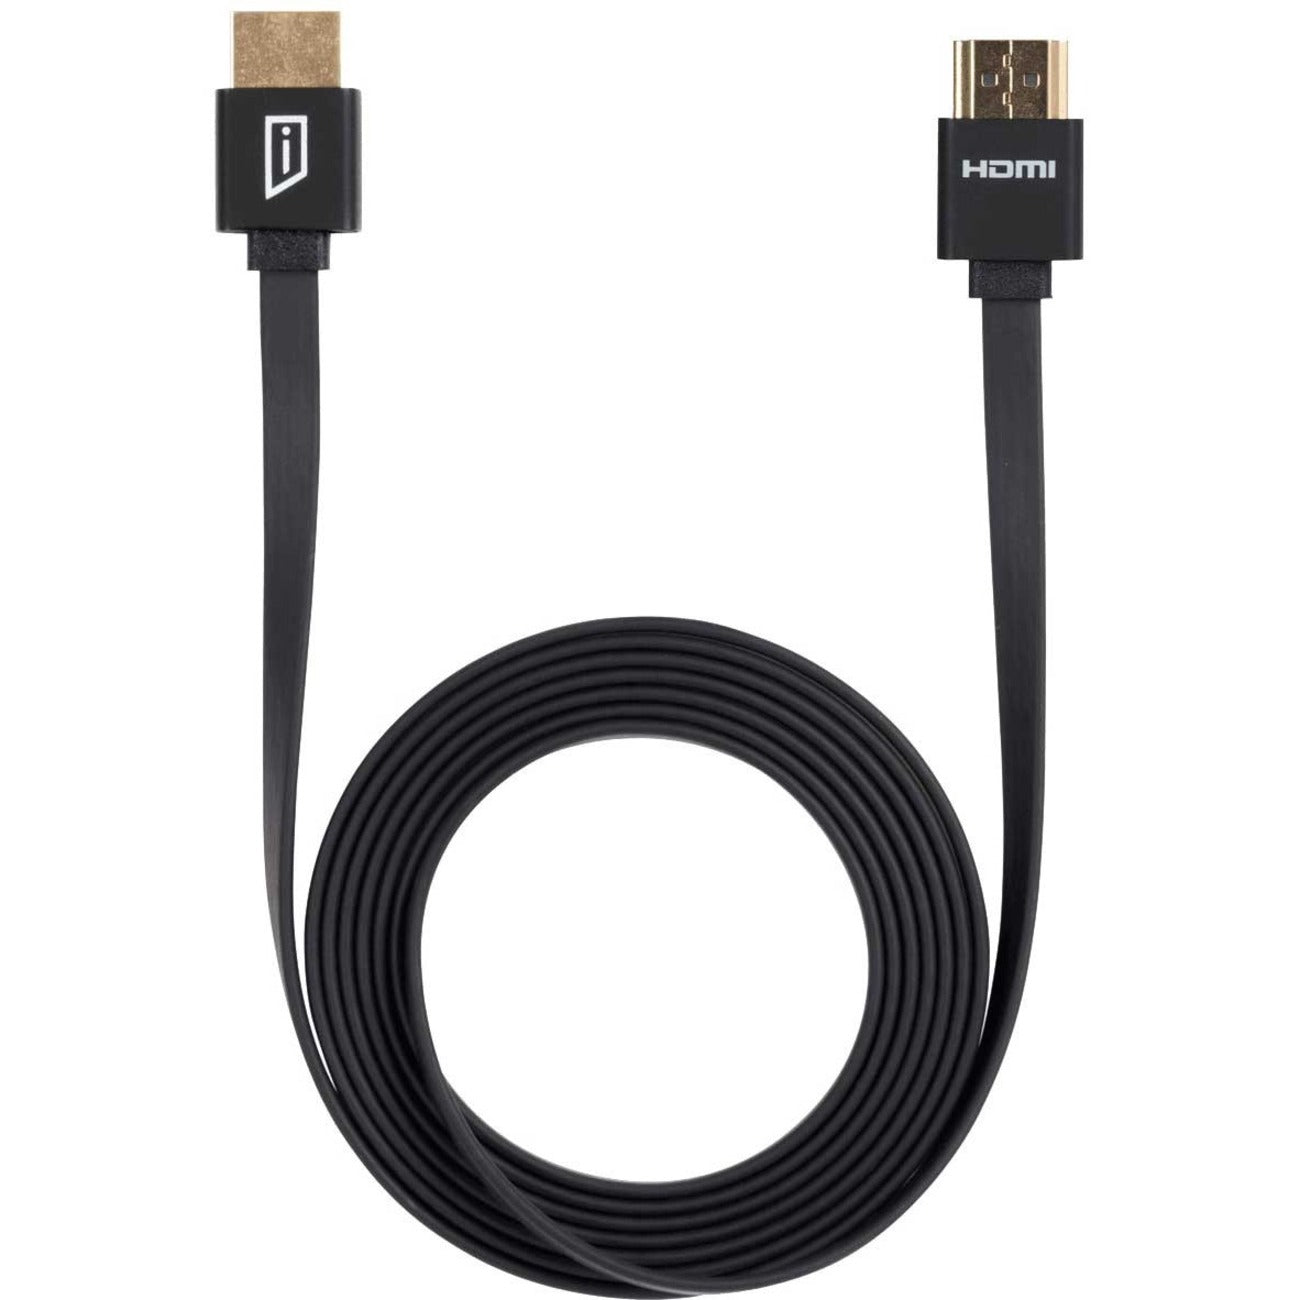 iStore ACC967CAI HDMI Cable, 5.91 ft, Flat, Tangle-free, 1 Year Warranty